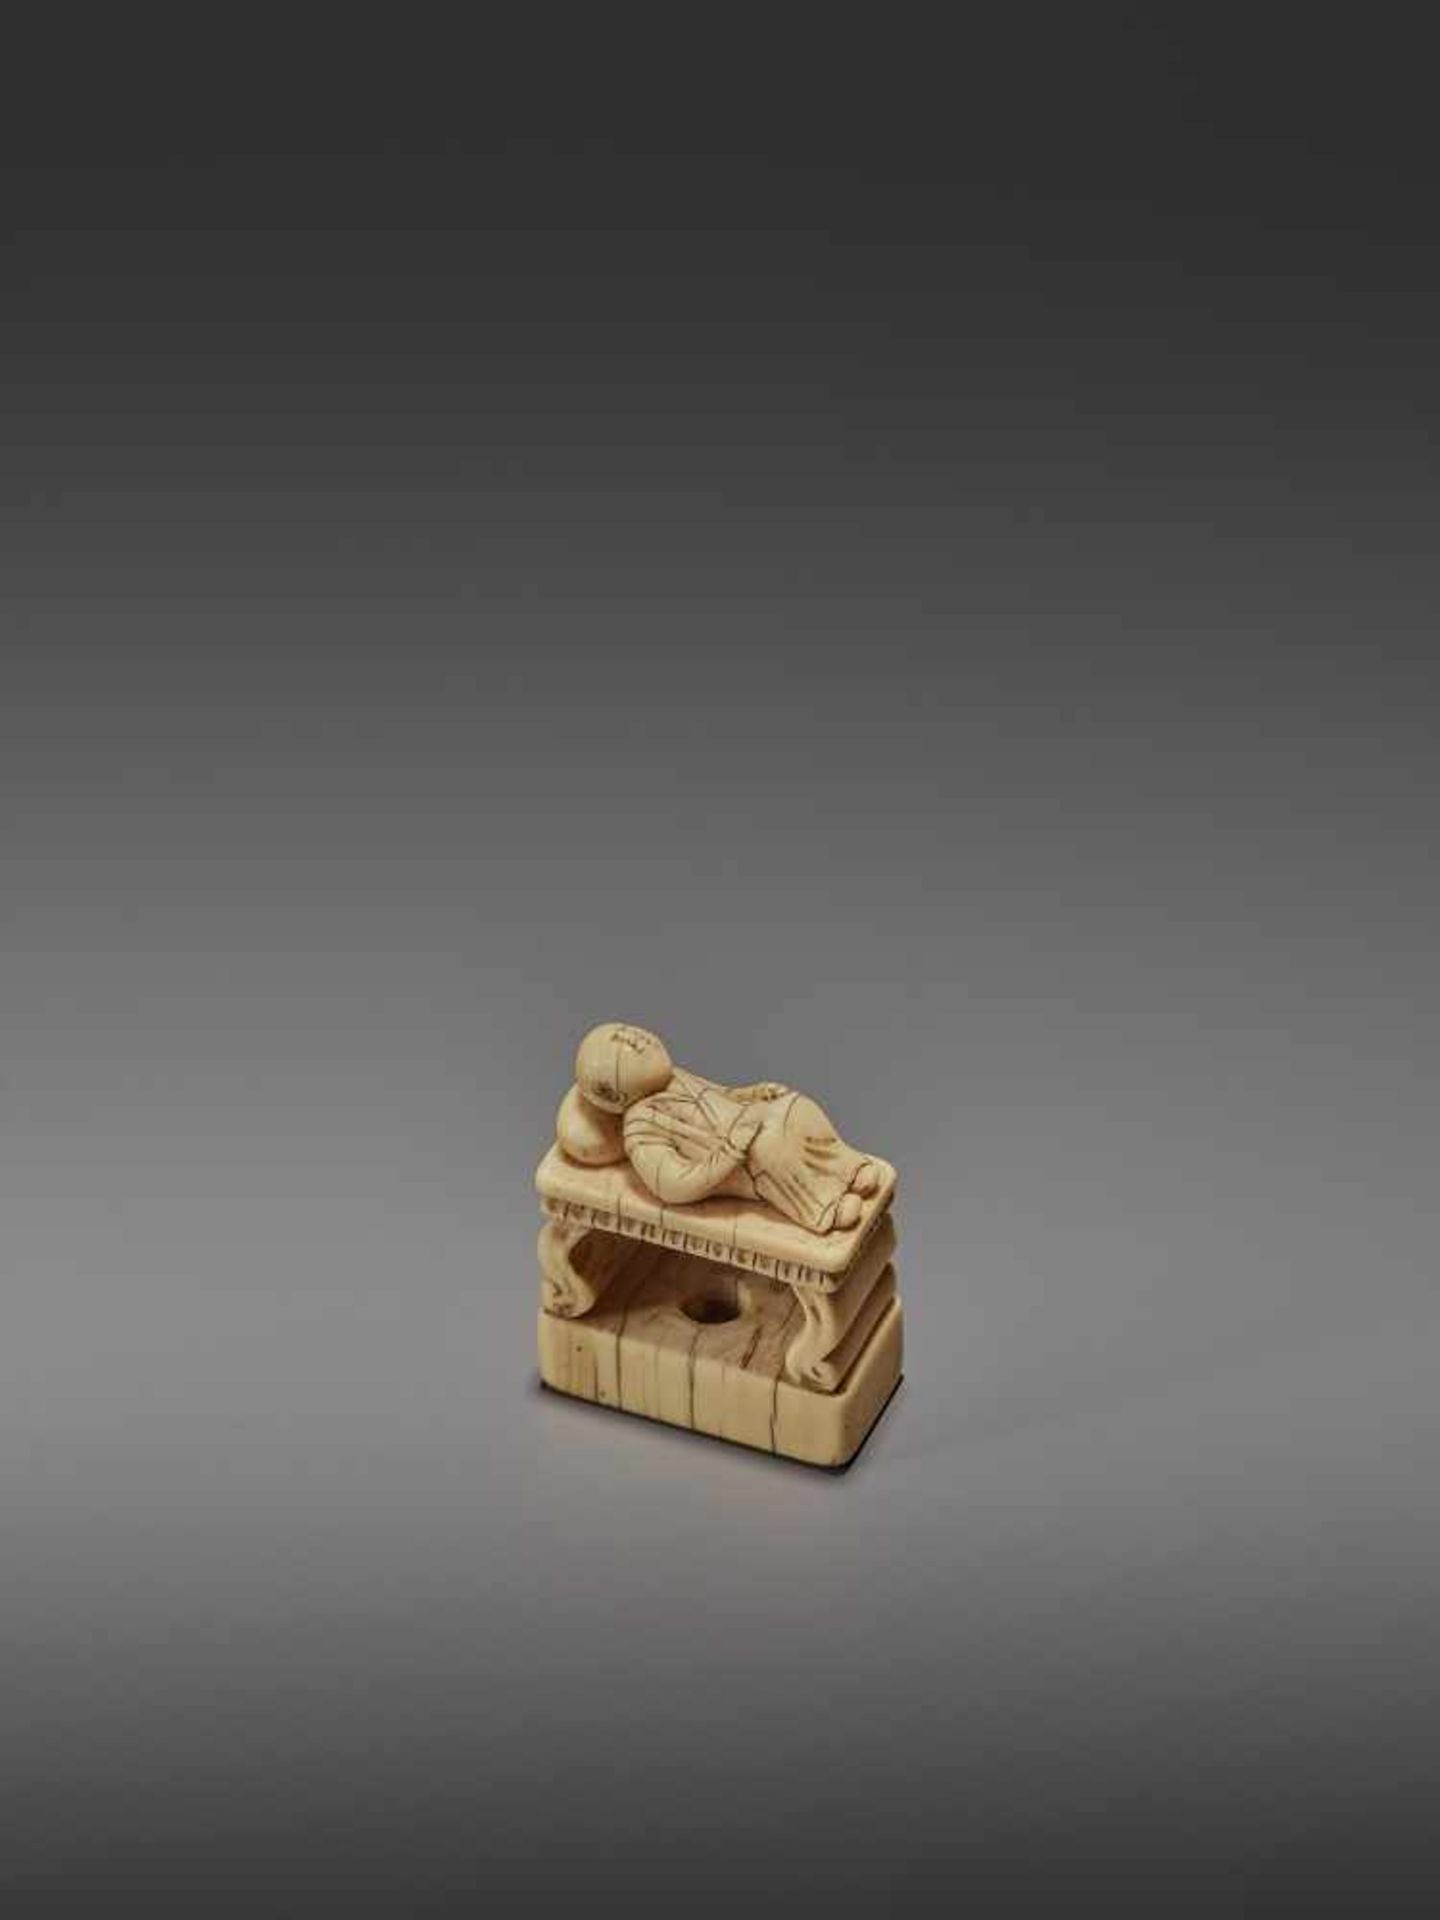 AN EARLY IVORY NETSUKE OF A CHINESE MAN SLEEPING ON AN OPIUM BED UnsignedJapan, early 18th - Bild 9 aus 11